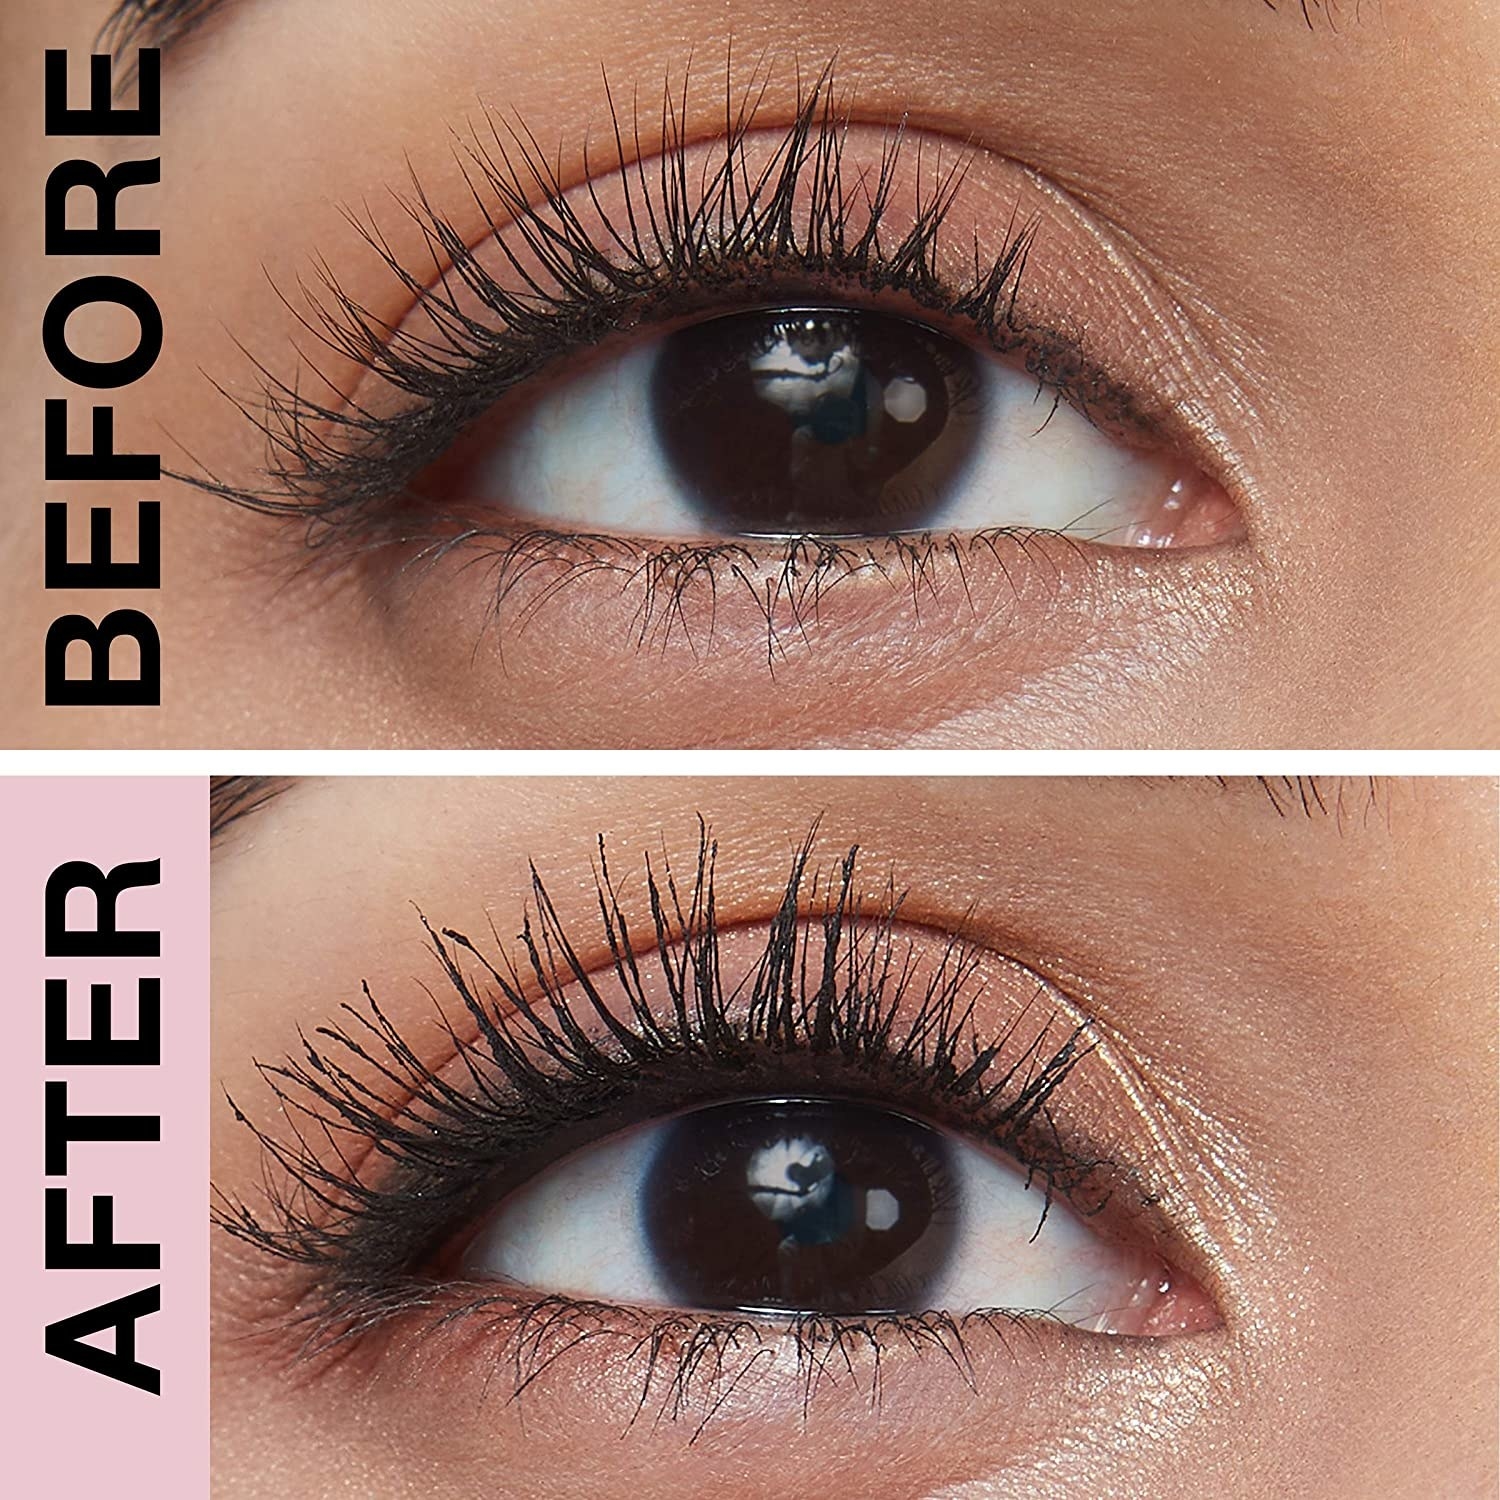 A before image of someone&#x27;s eye lashes looking sparse and undefined, an after image of the wearing mascara on their lashes making them longer and thicker